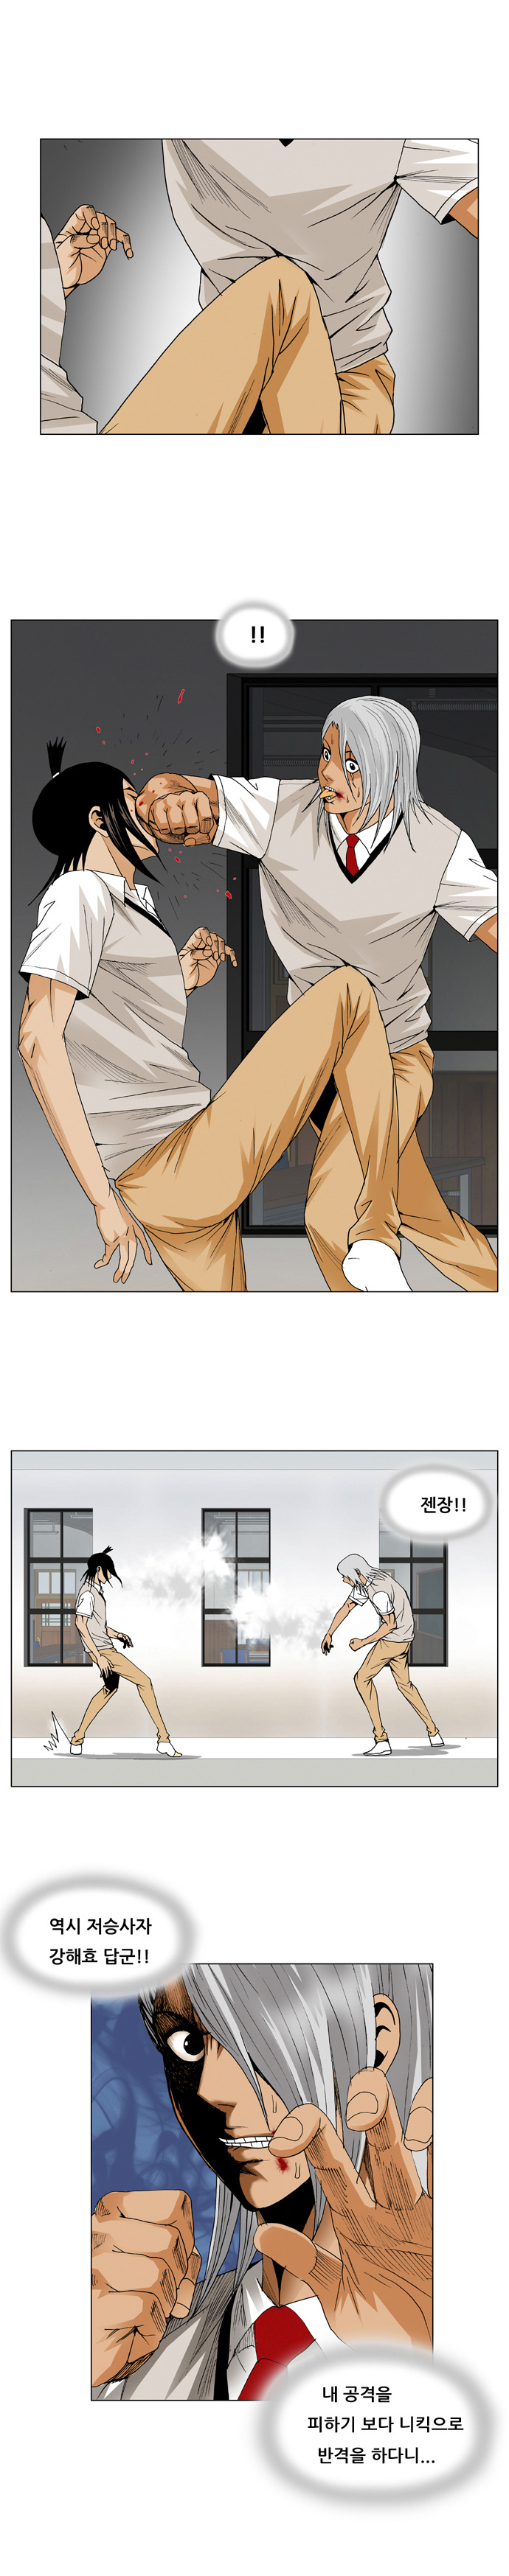 Ultimate Legend - Kang Hae Hyo - Chapter 54 - Page 14